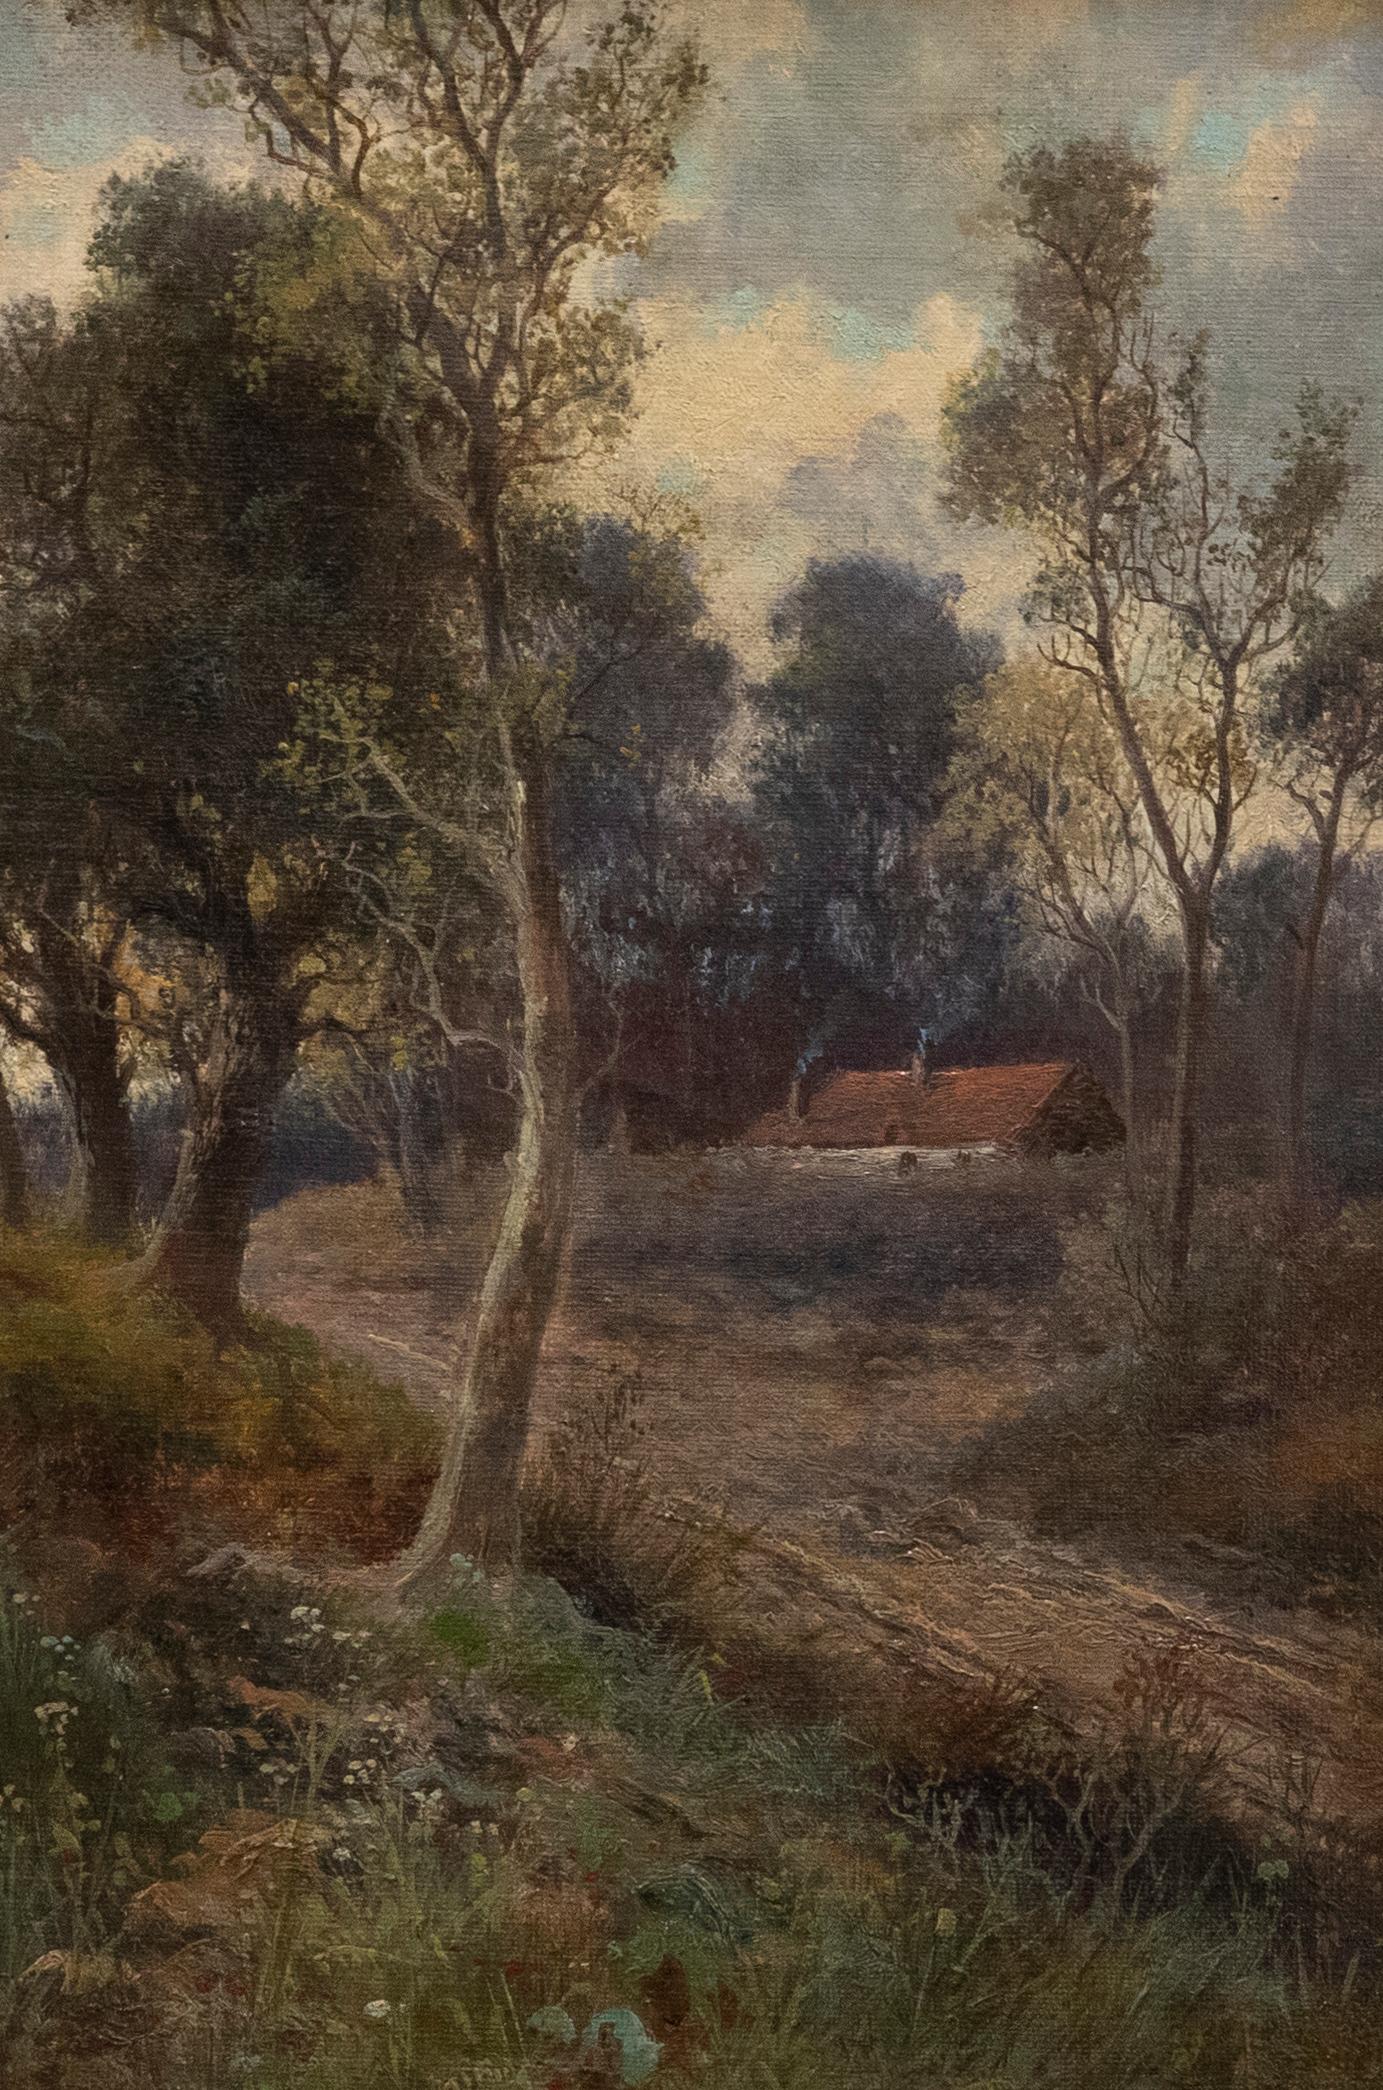 A charming oil study depicting a cottage nestled in the thick off a forest just off of a beaten track, Signed to the lower right. Well presented in a gilt frame with ornate acanthus ornament to the cover. On canvas. 
